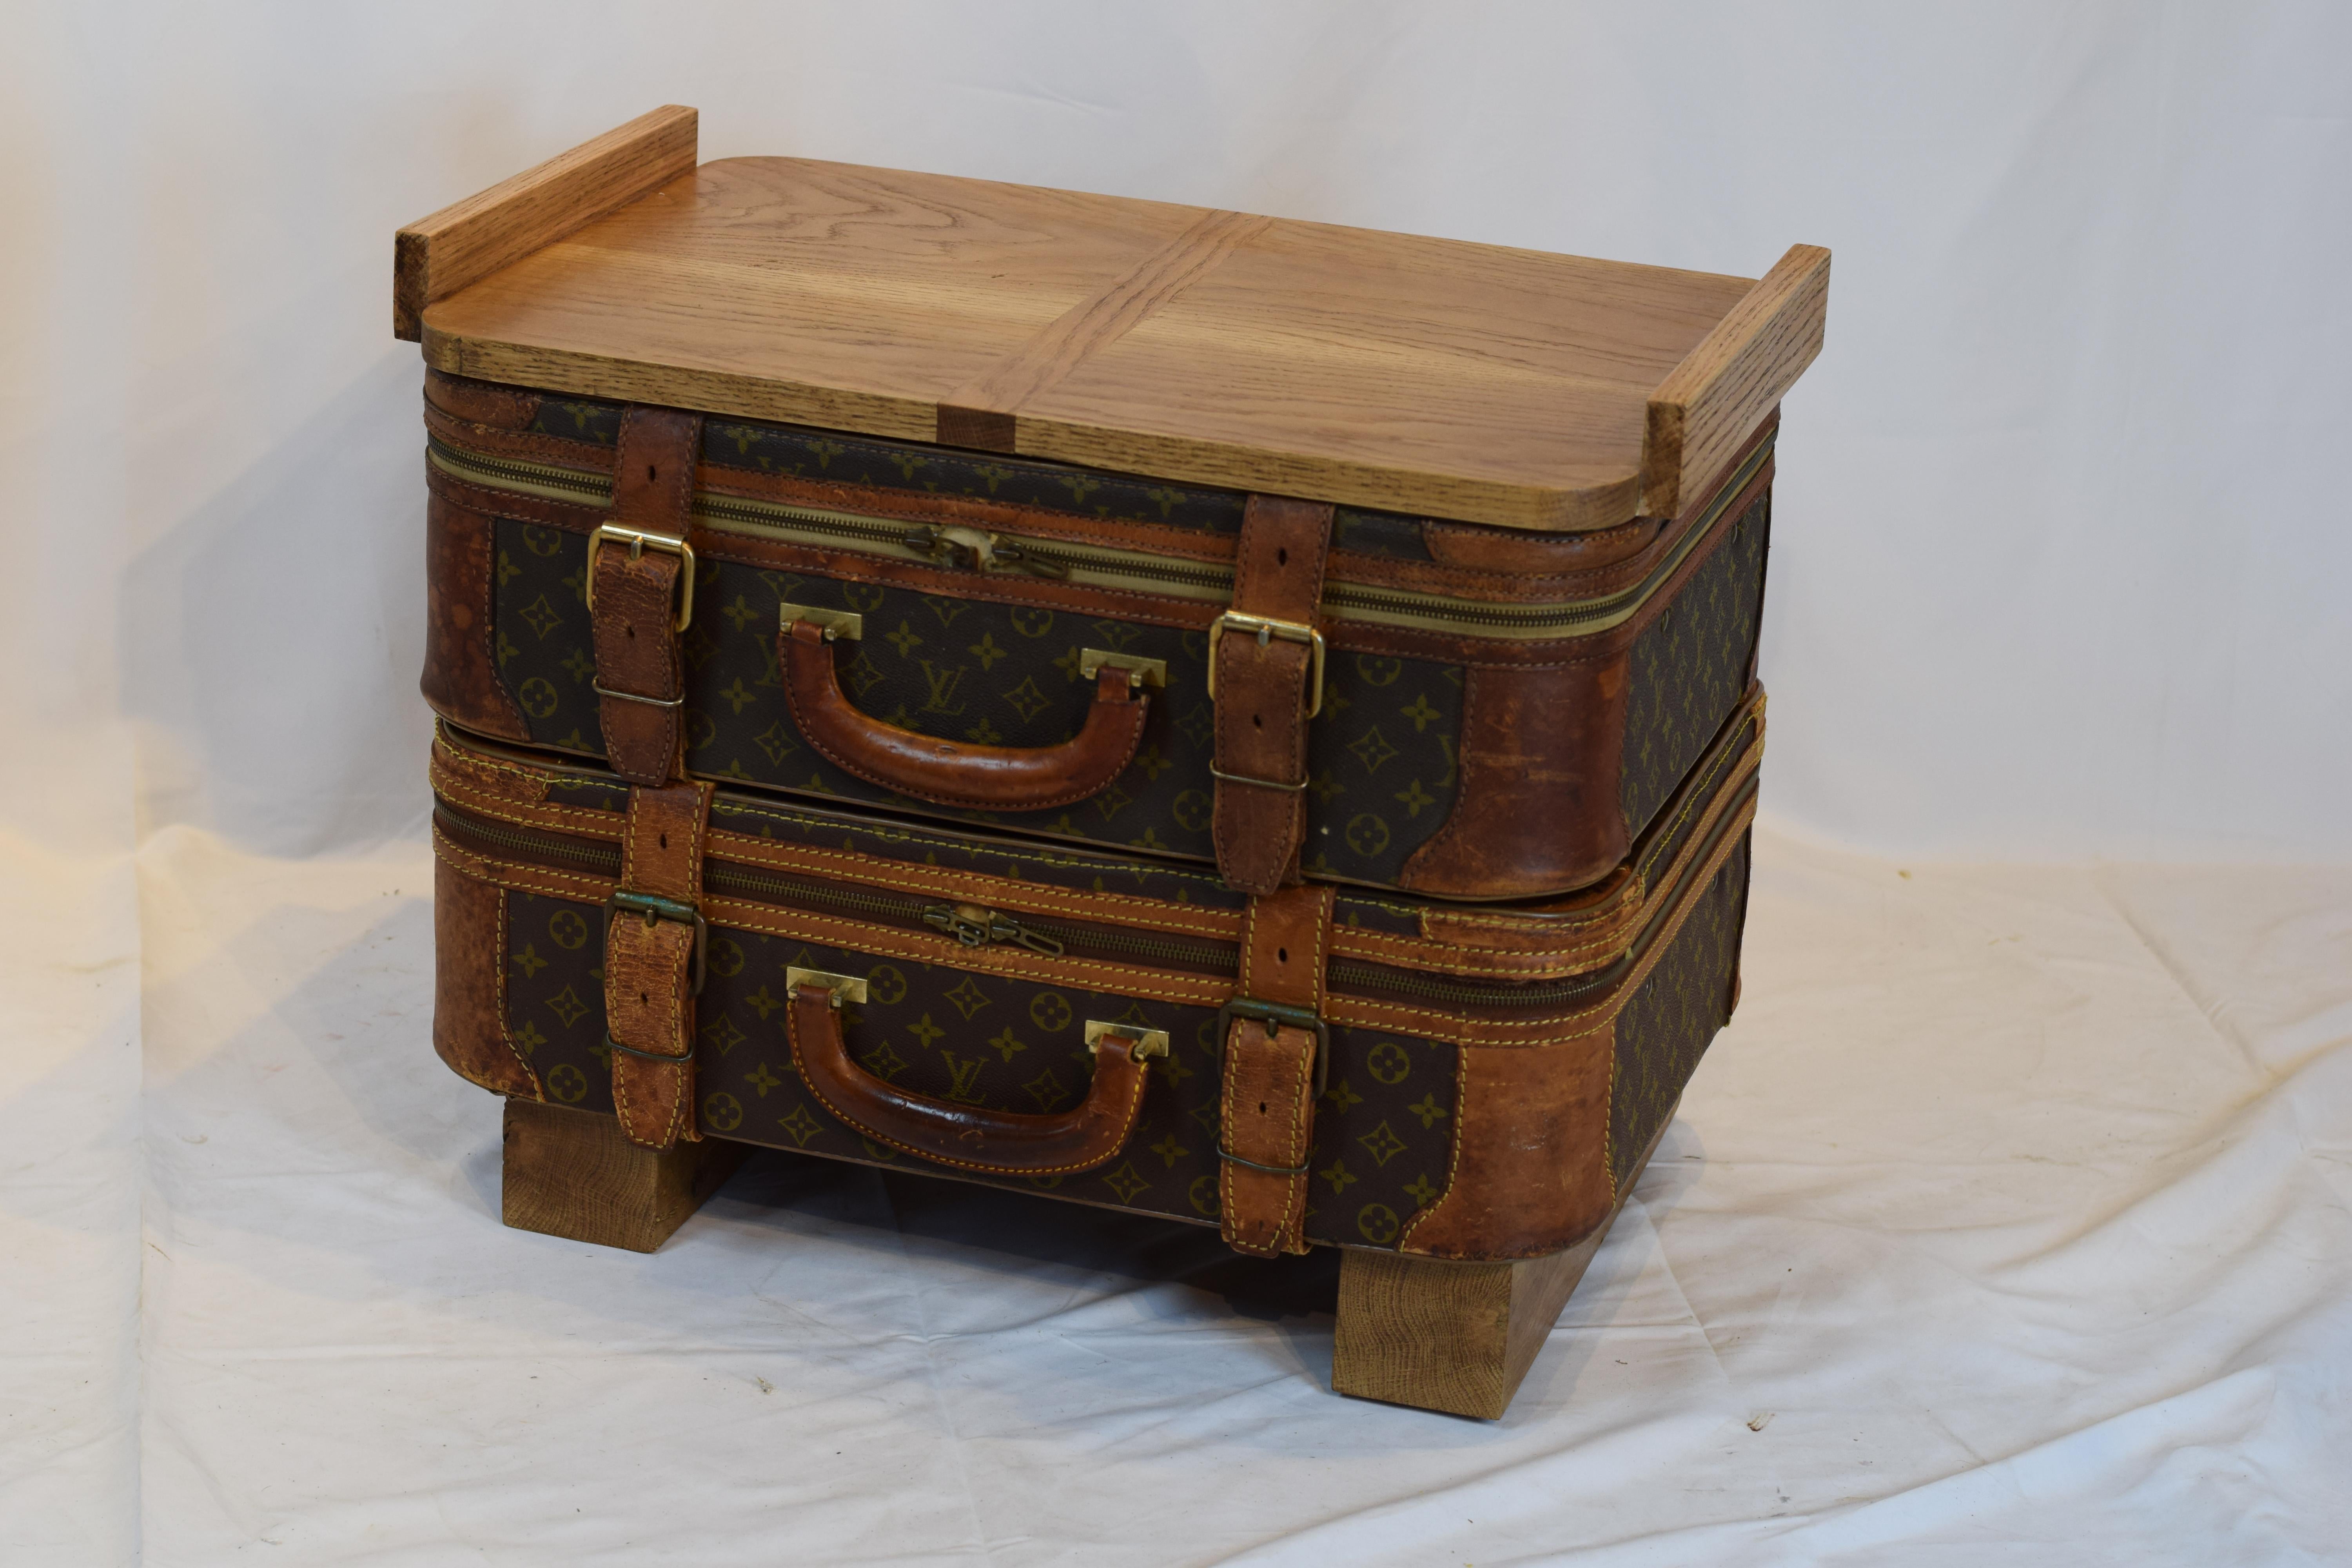 This Louis Vuitton luggage table is a custom creation. Two vintage Louis Vuitton luggage pieces using an oak platform for the feet and topped with a beautiful multi functional tray. The luggage itself is in very nice condition and has not been